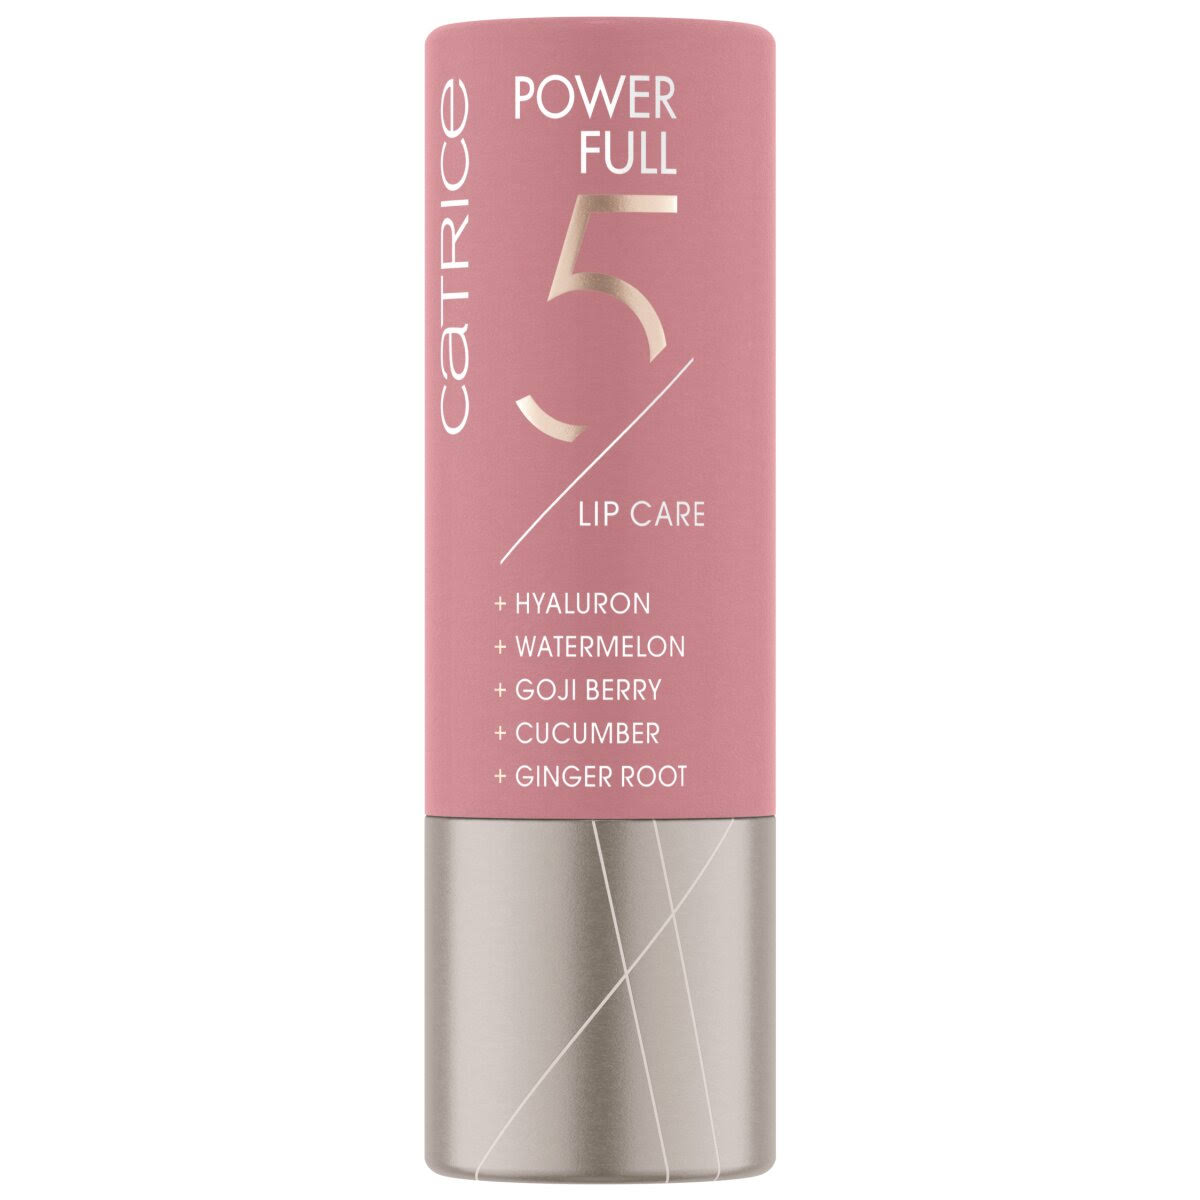 Catrice Power Full 5 Lip Care 020 Sparkling Guave